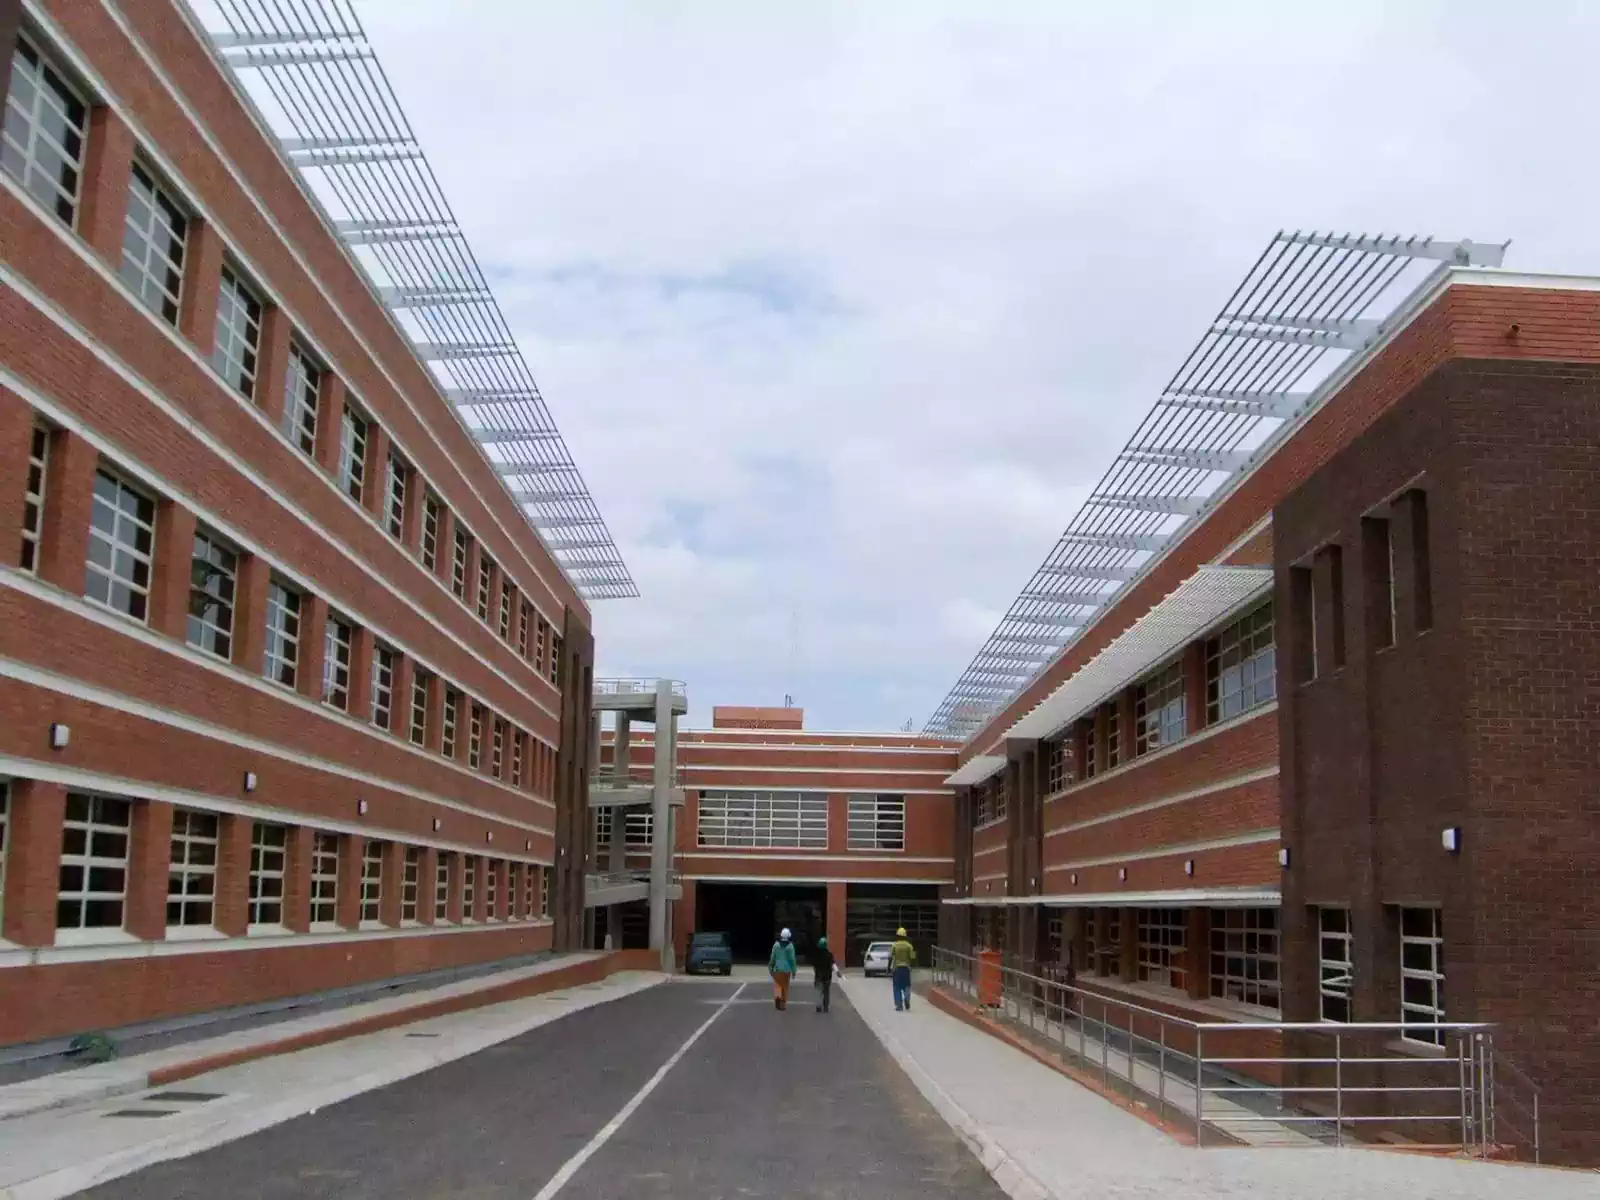 Parallel facebrick buildings with louvres for shade in medical facility designed by architect